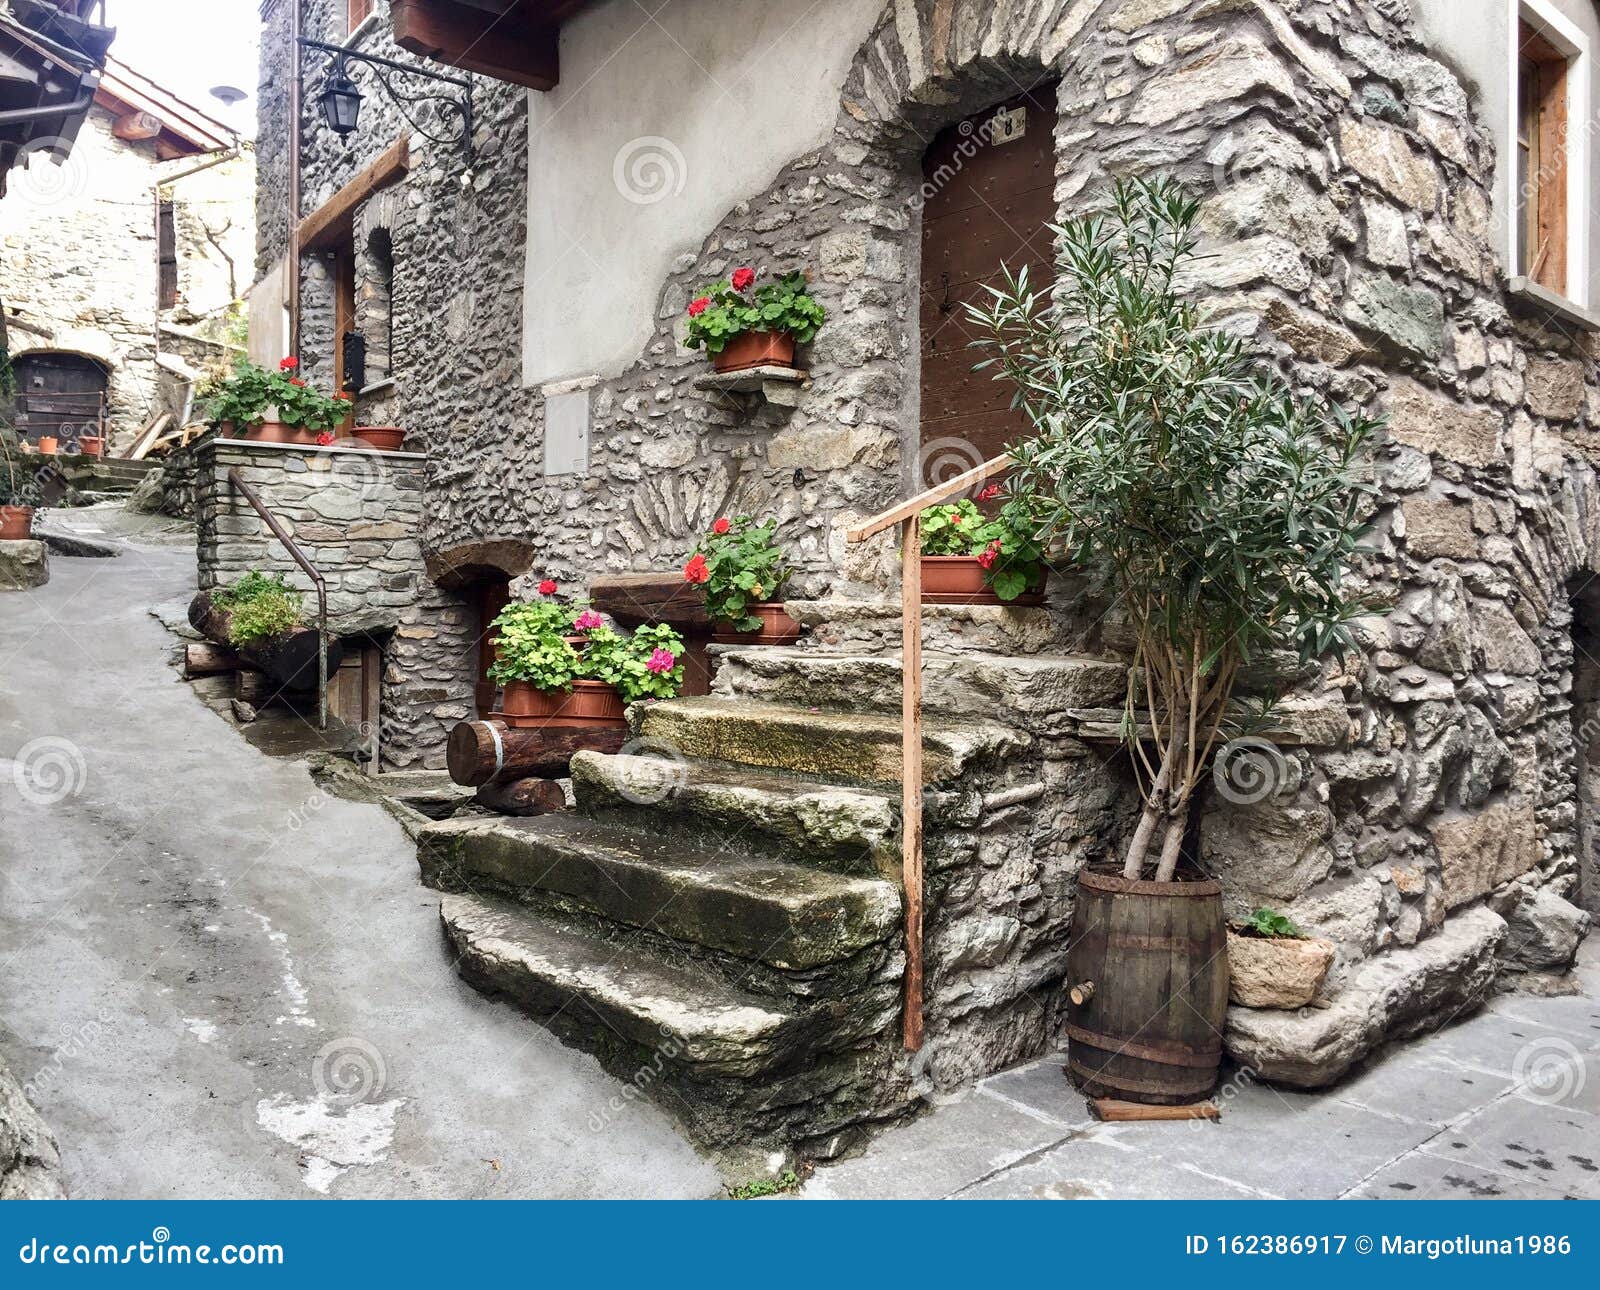 houses and flowers in exilles, piedmont, val di susa, italy